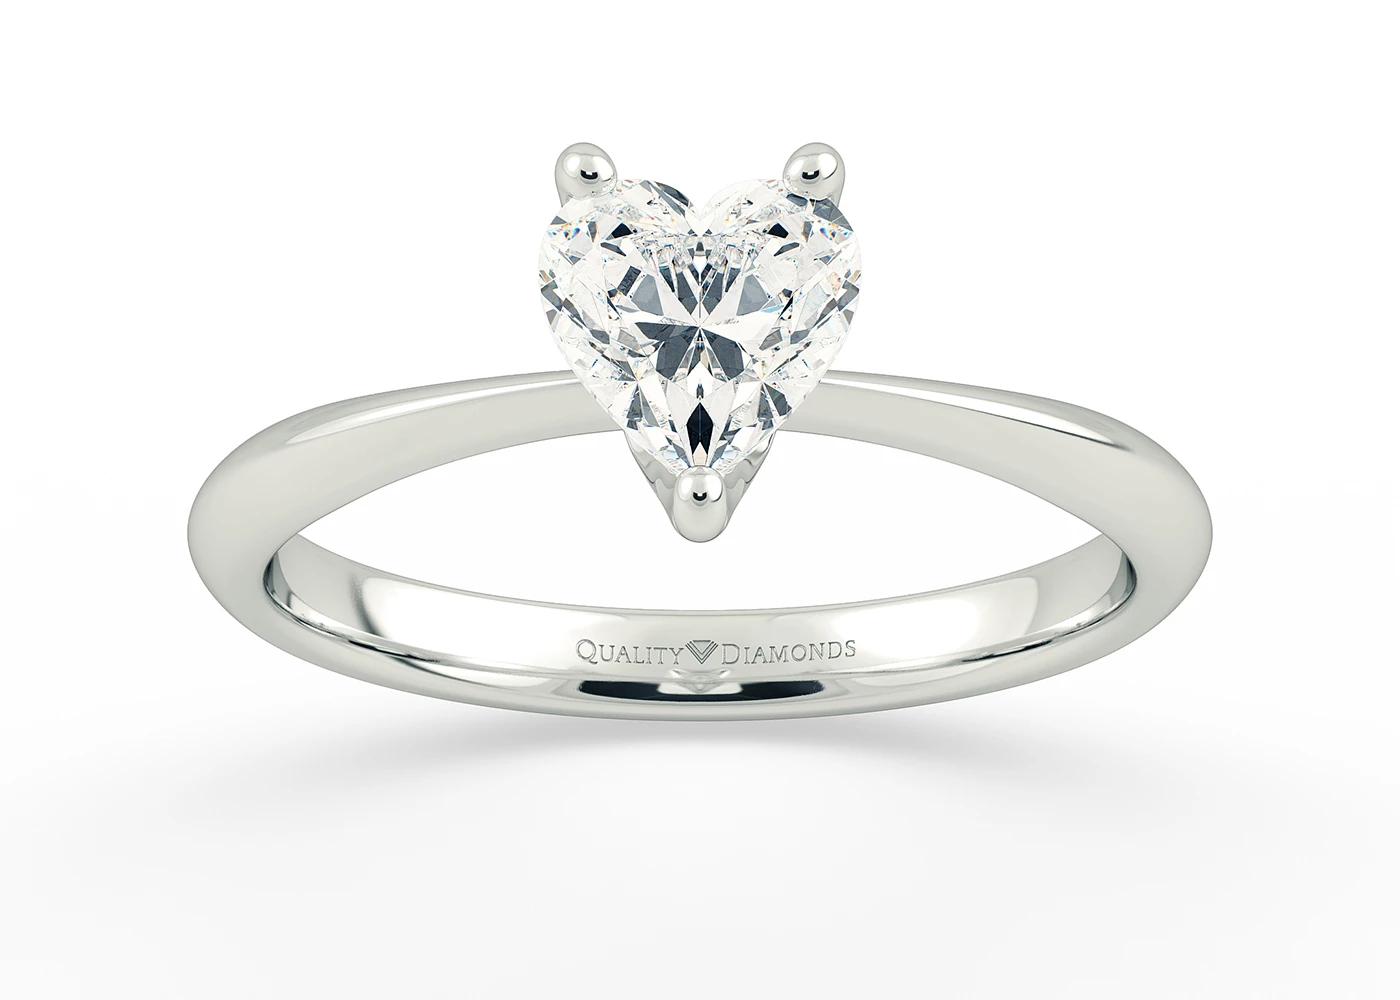 Half Carat Heart Solitaire Diamond Engagement Ring in 9K White Gold